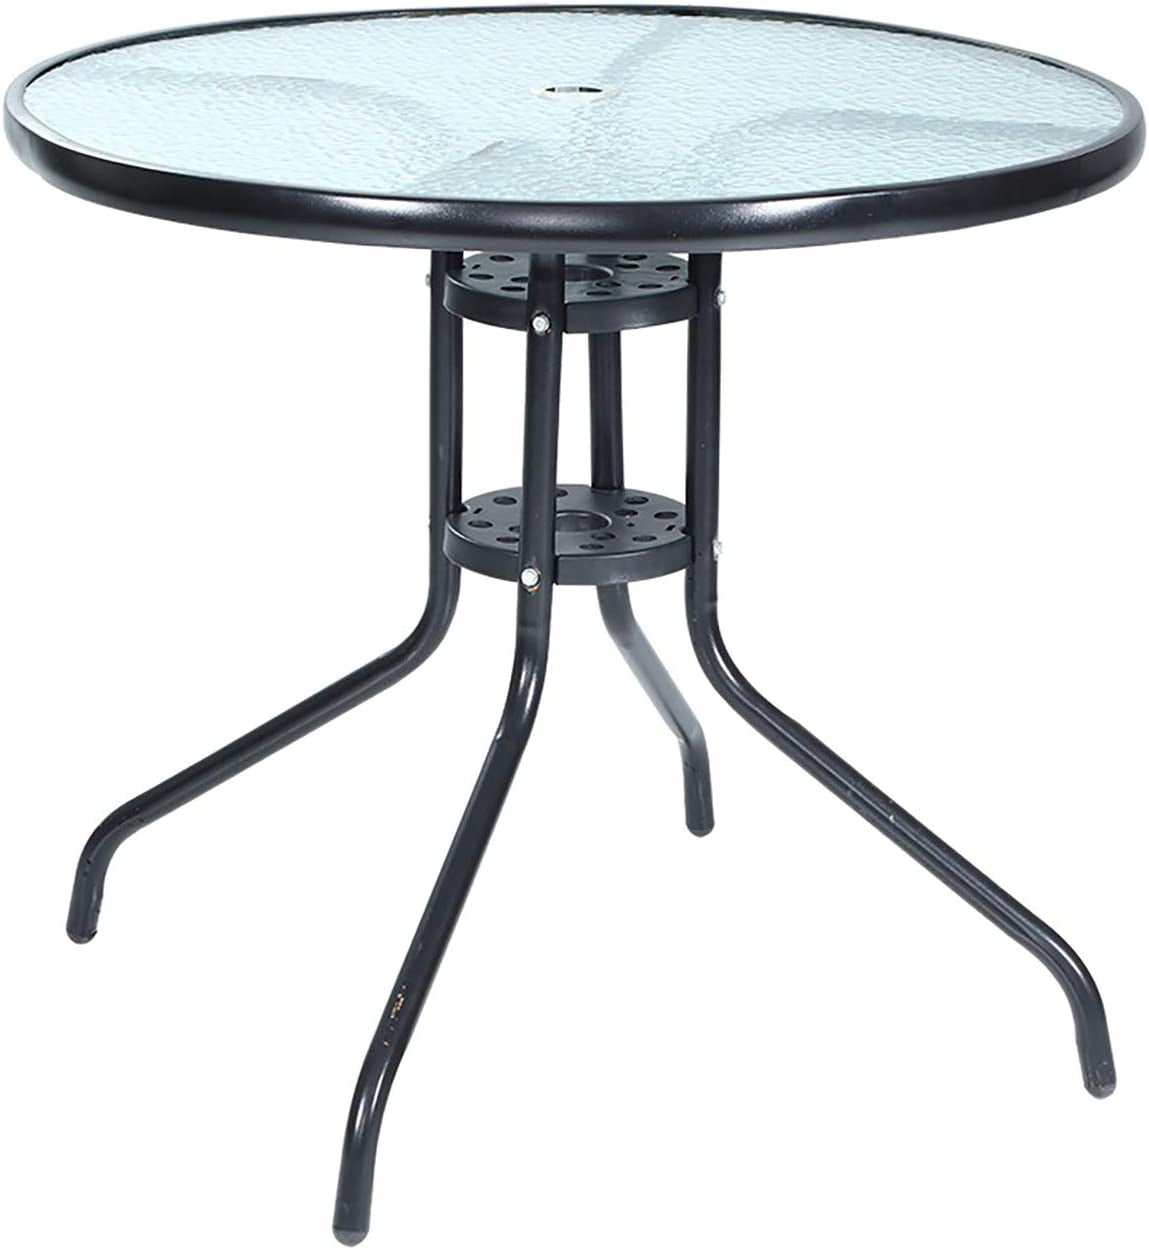 Gardeon, Gardeon Patio Bistro Table round Outdoor Coffee Table, round Tempered Glass Top with 45Mm Umbrella Hole, Bar Table with Metal Frame for Balcony Backyard Lawn and Garden